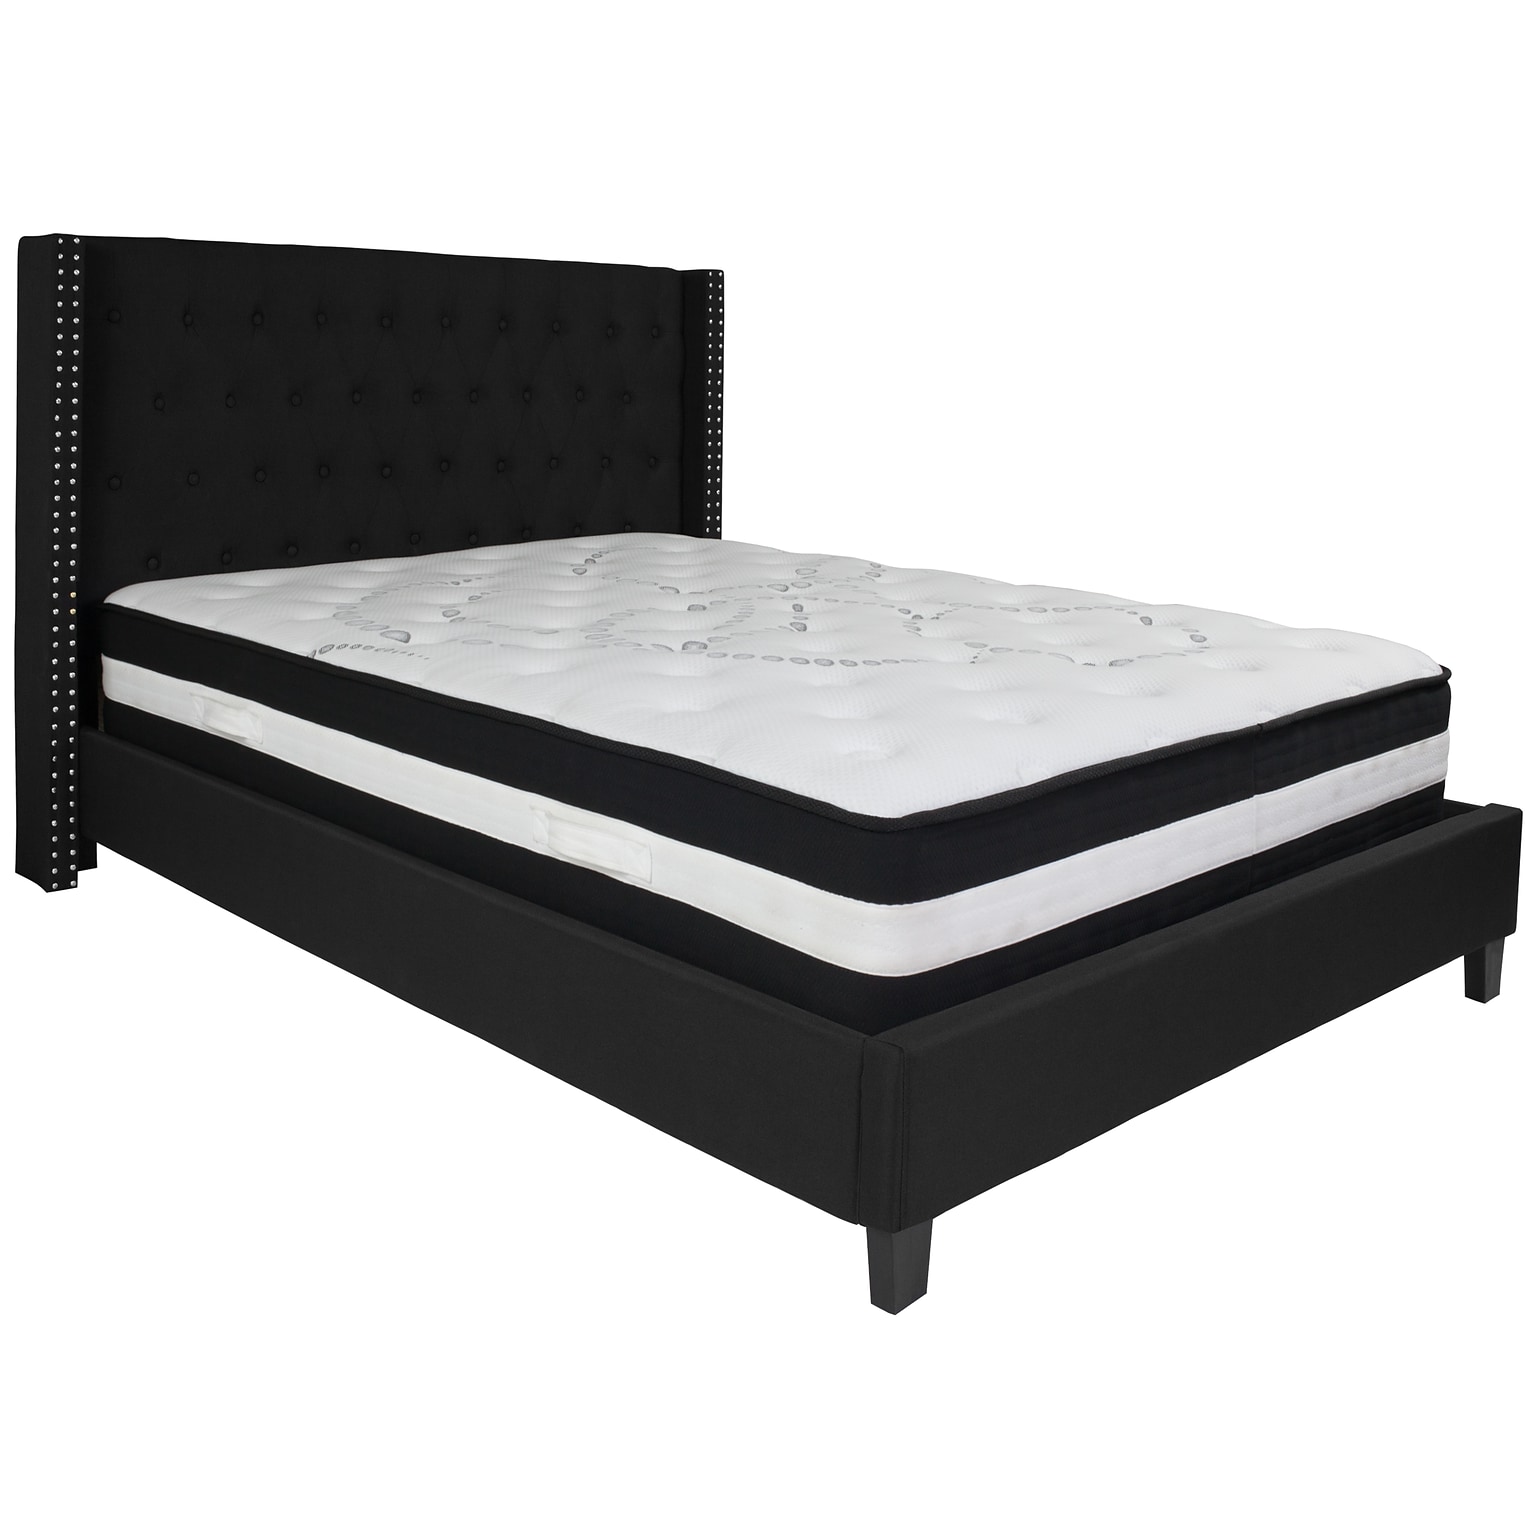 Flash Furniture Riverdale Tufted Upholstered Platform Bed in Black Fabric with Pocket Spring Mattress, Queen (HGBM39)